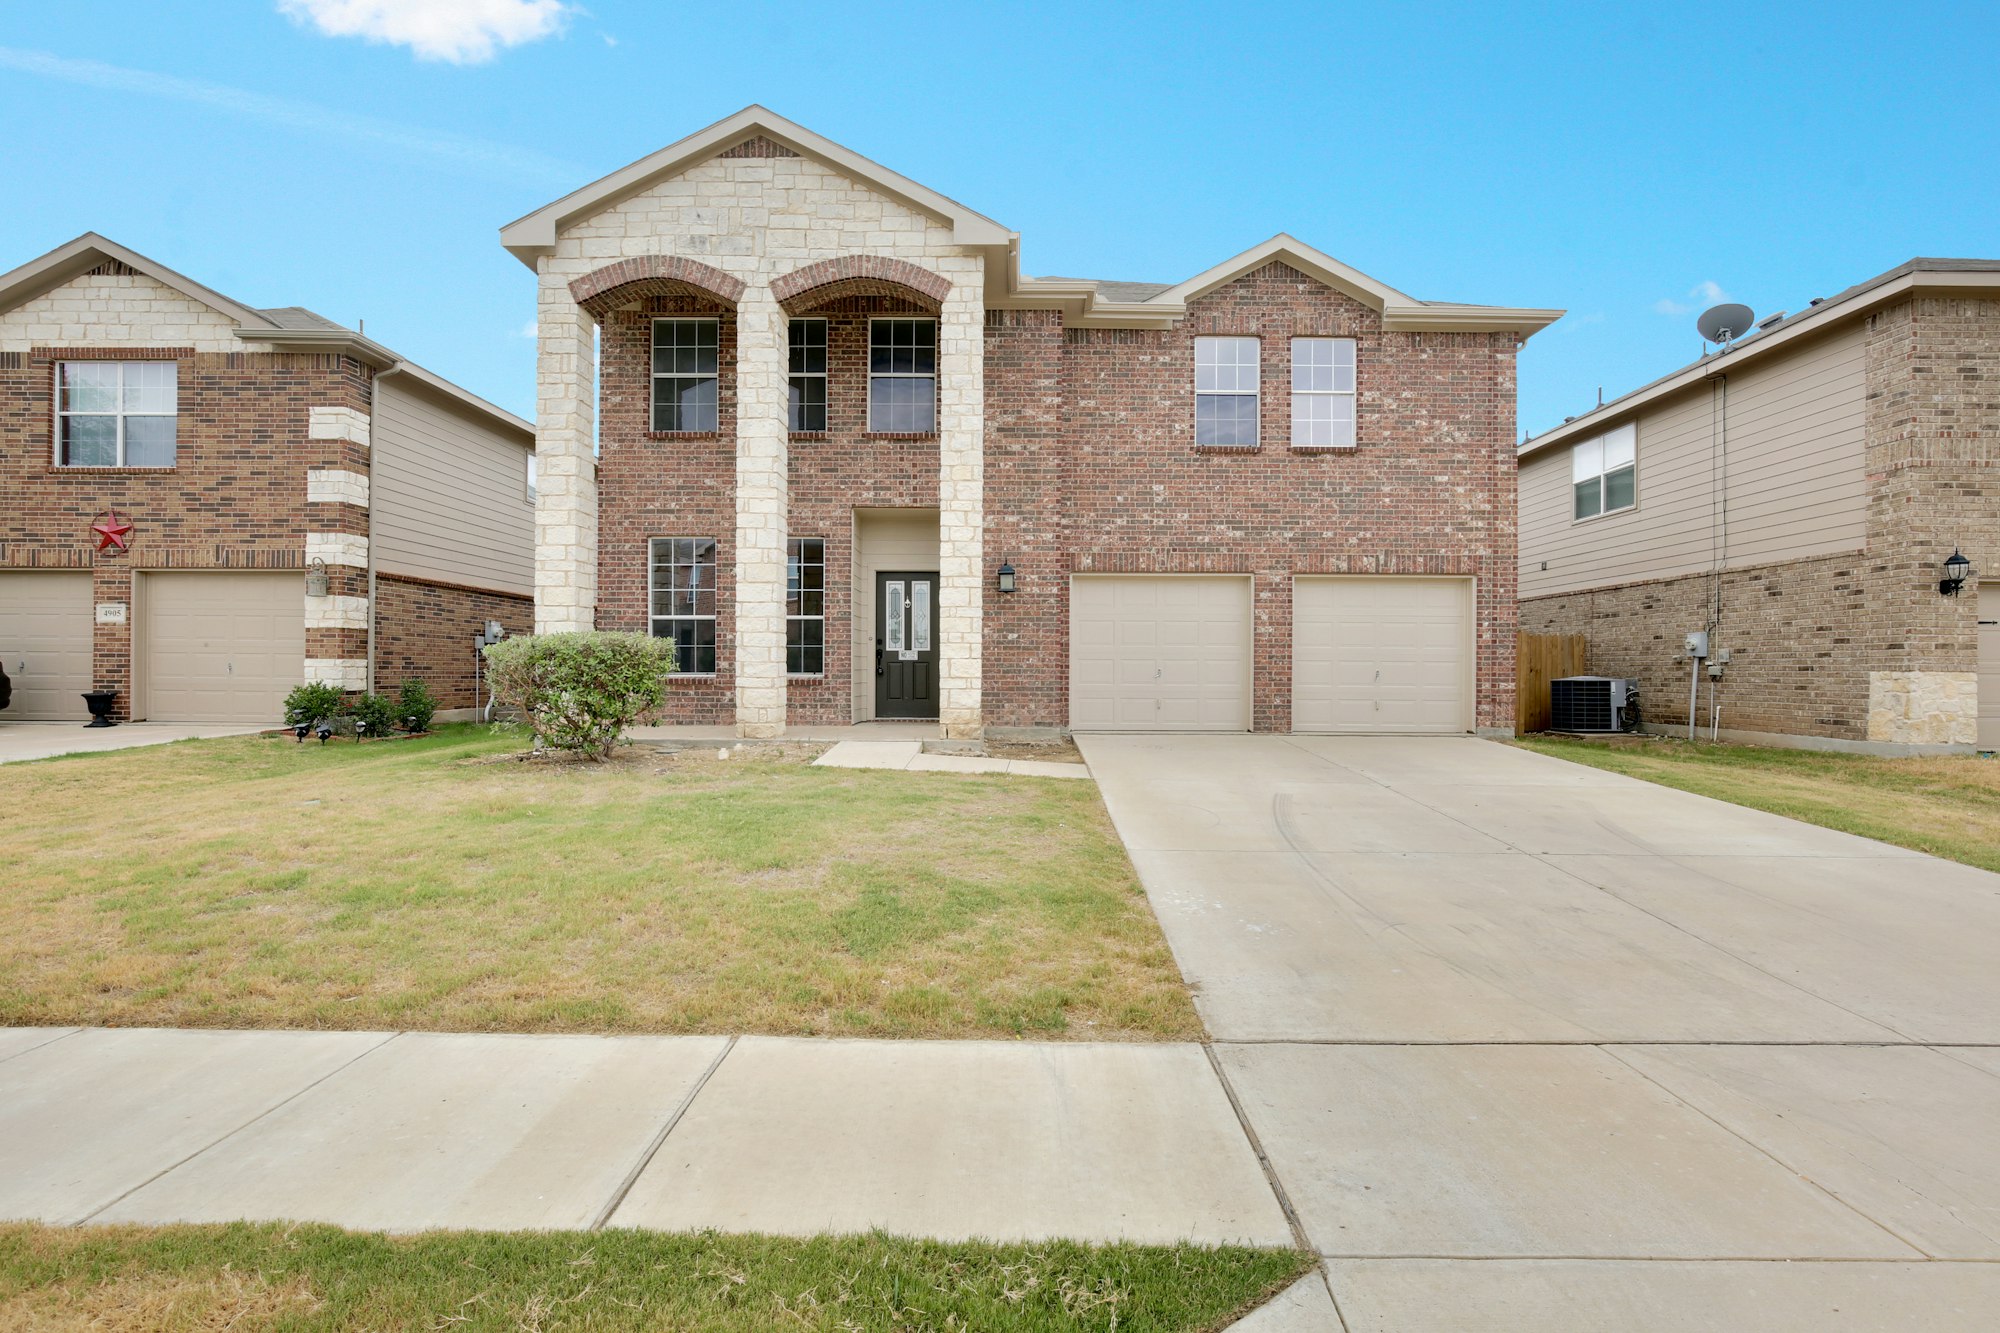 Photo 1 of 38 - 4909 Blue Top Dr, Fort Worth, TX 76179